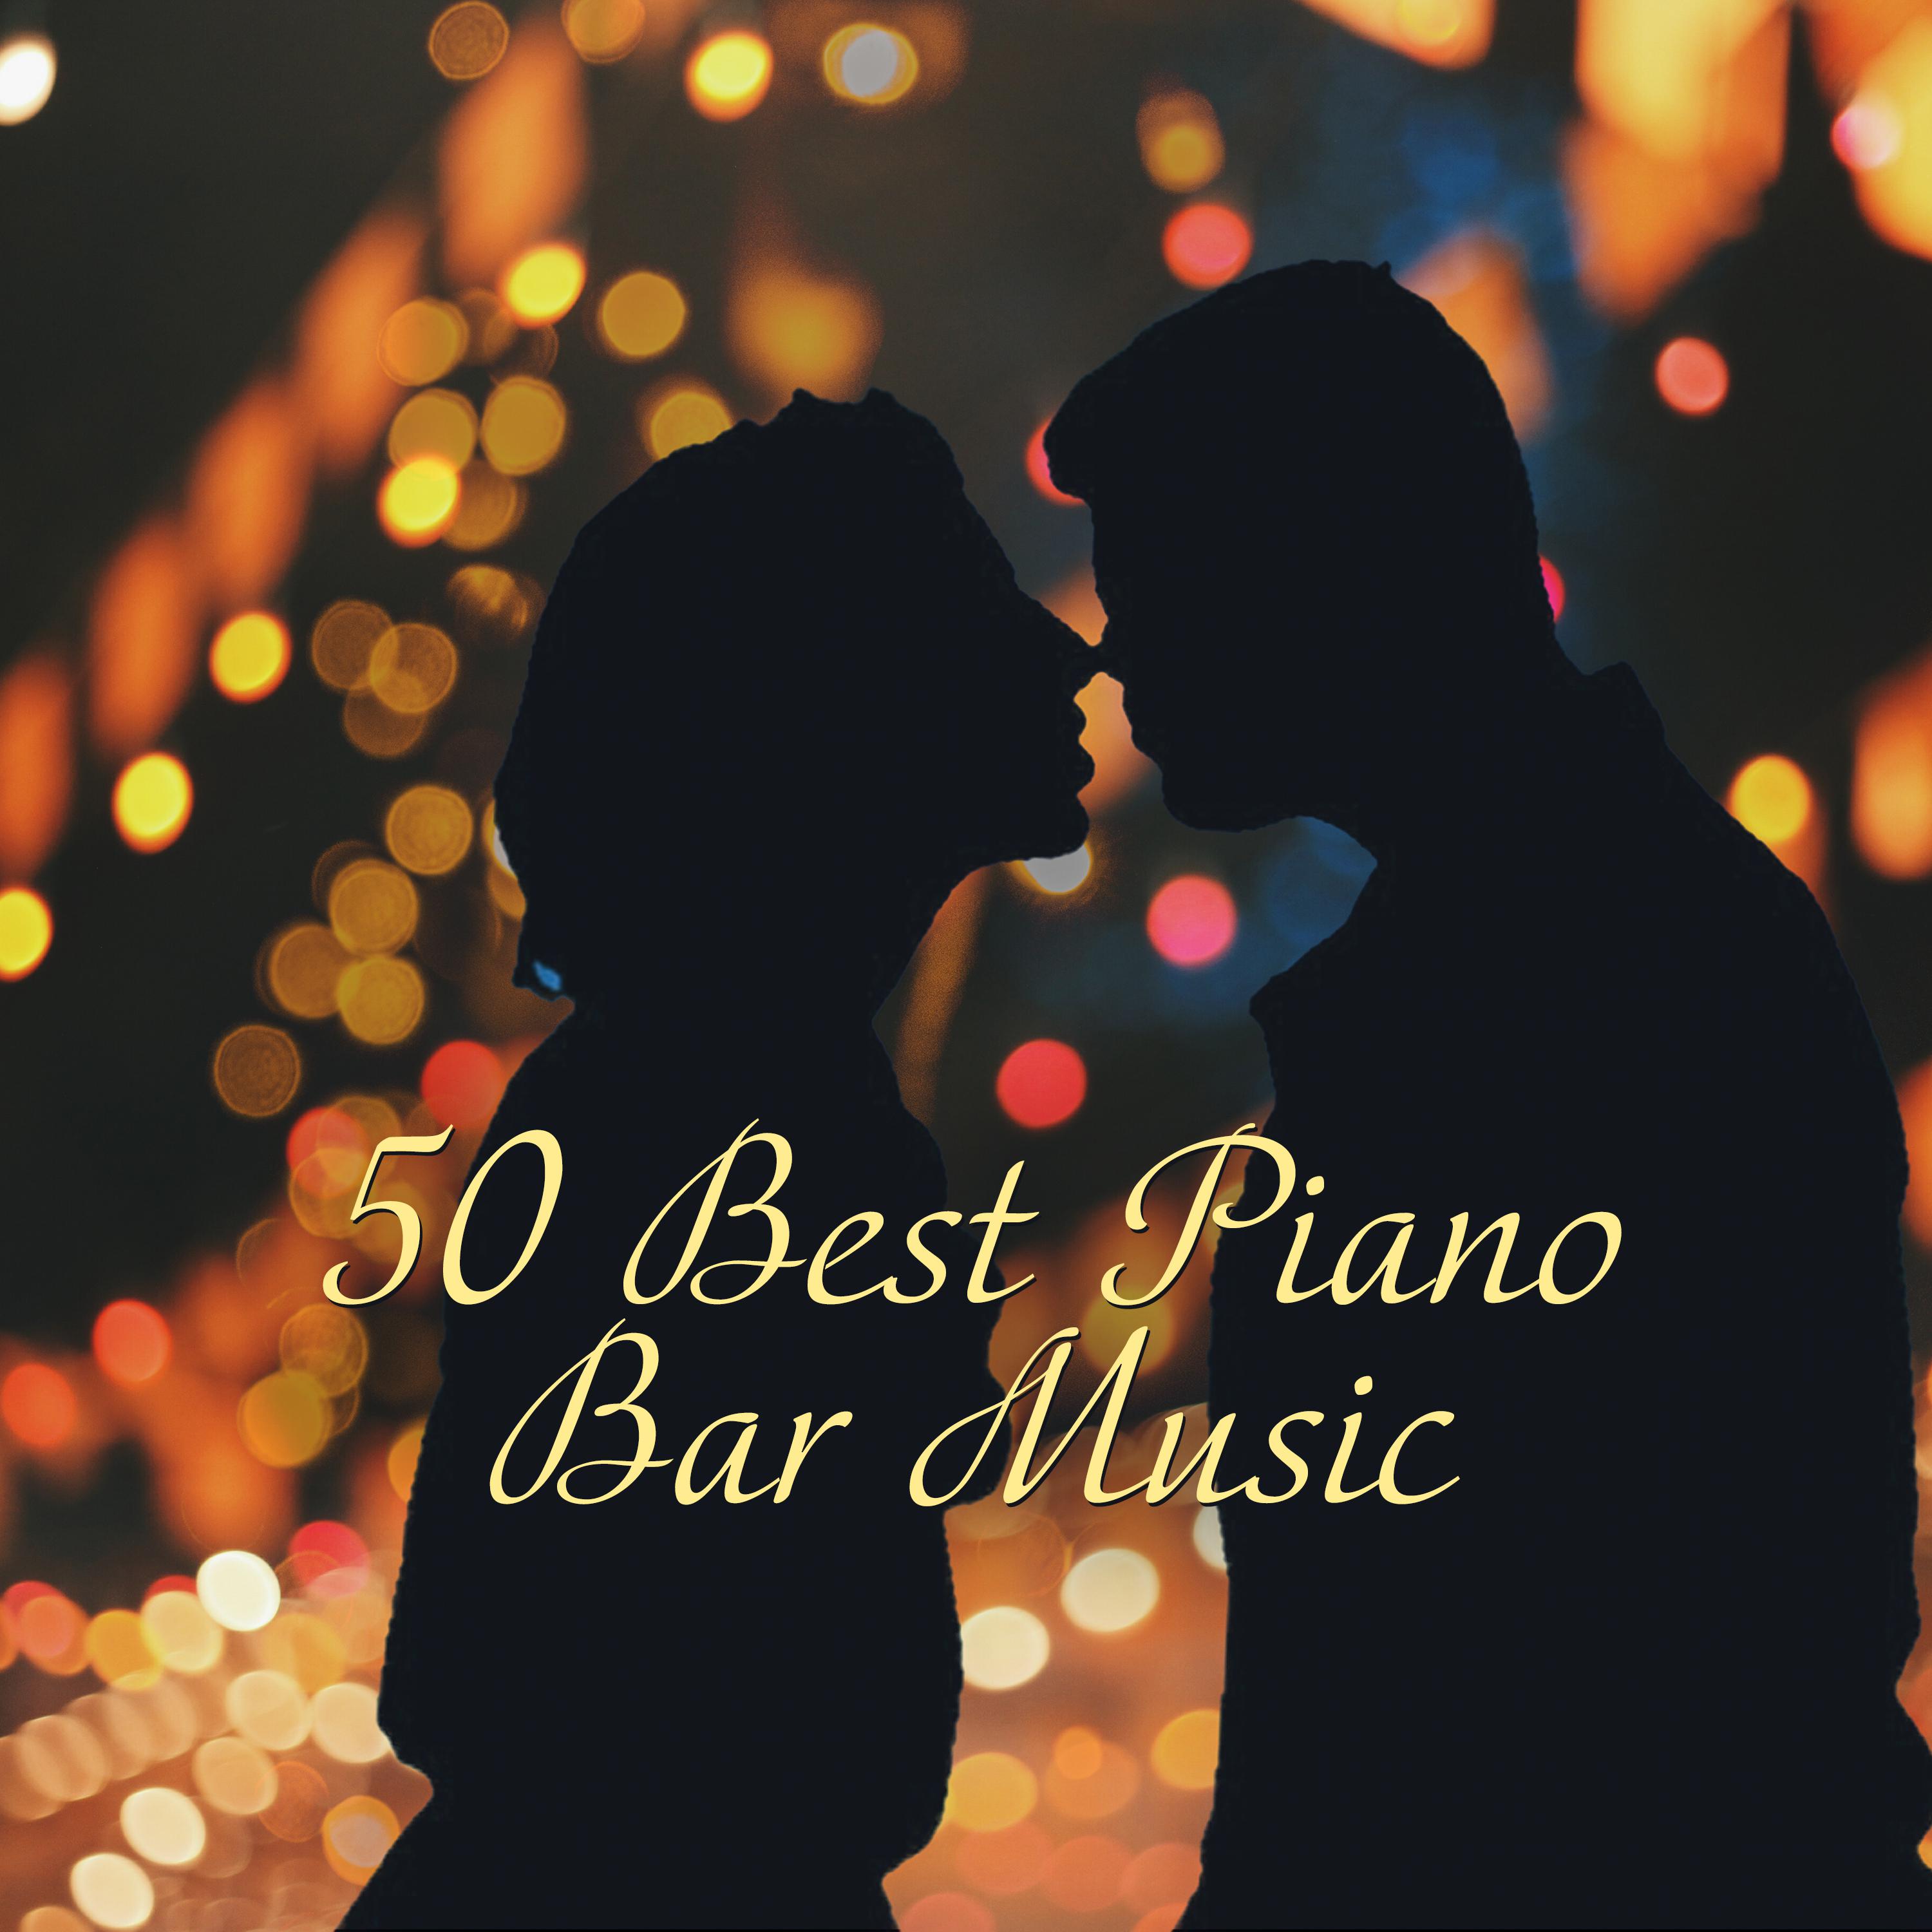 50 Best Piano Bar Music (Soft instrumental Background Music, Romantic & Emotional Songs)